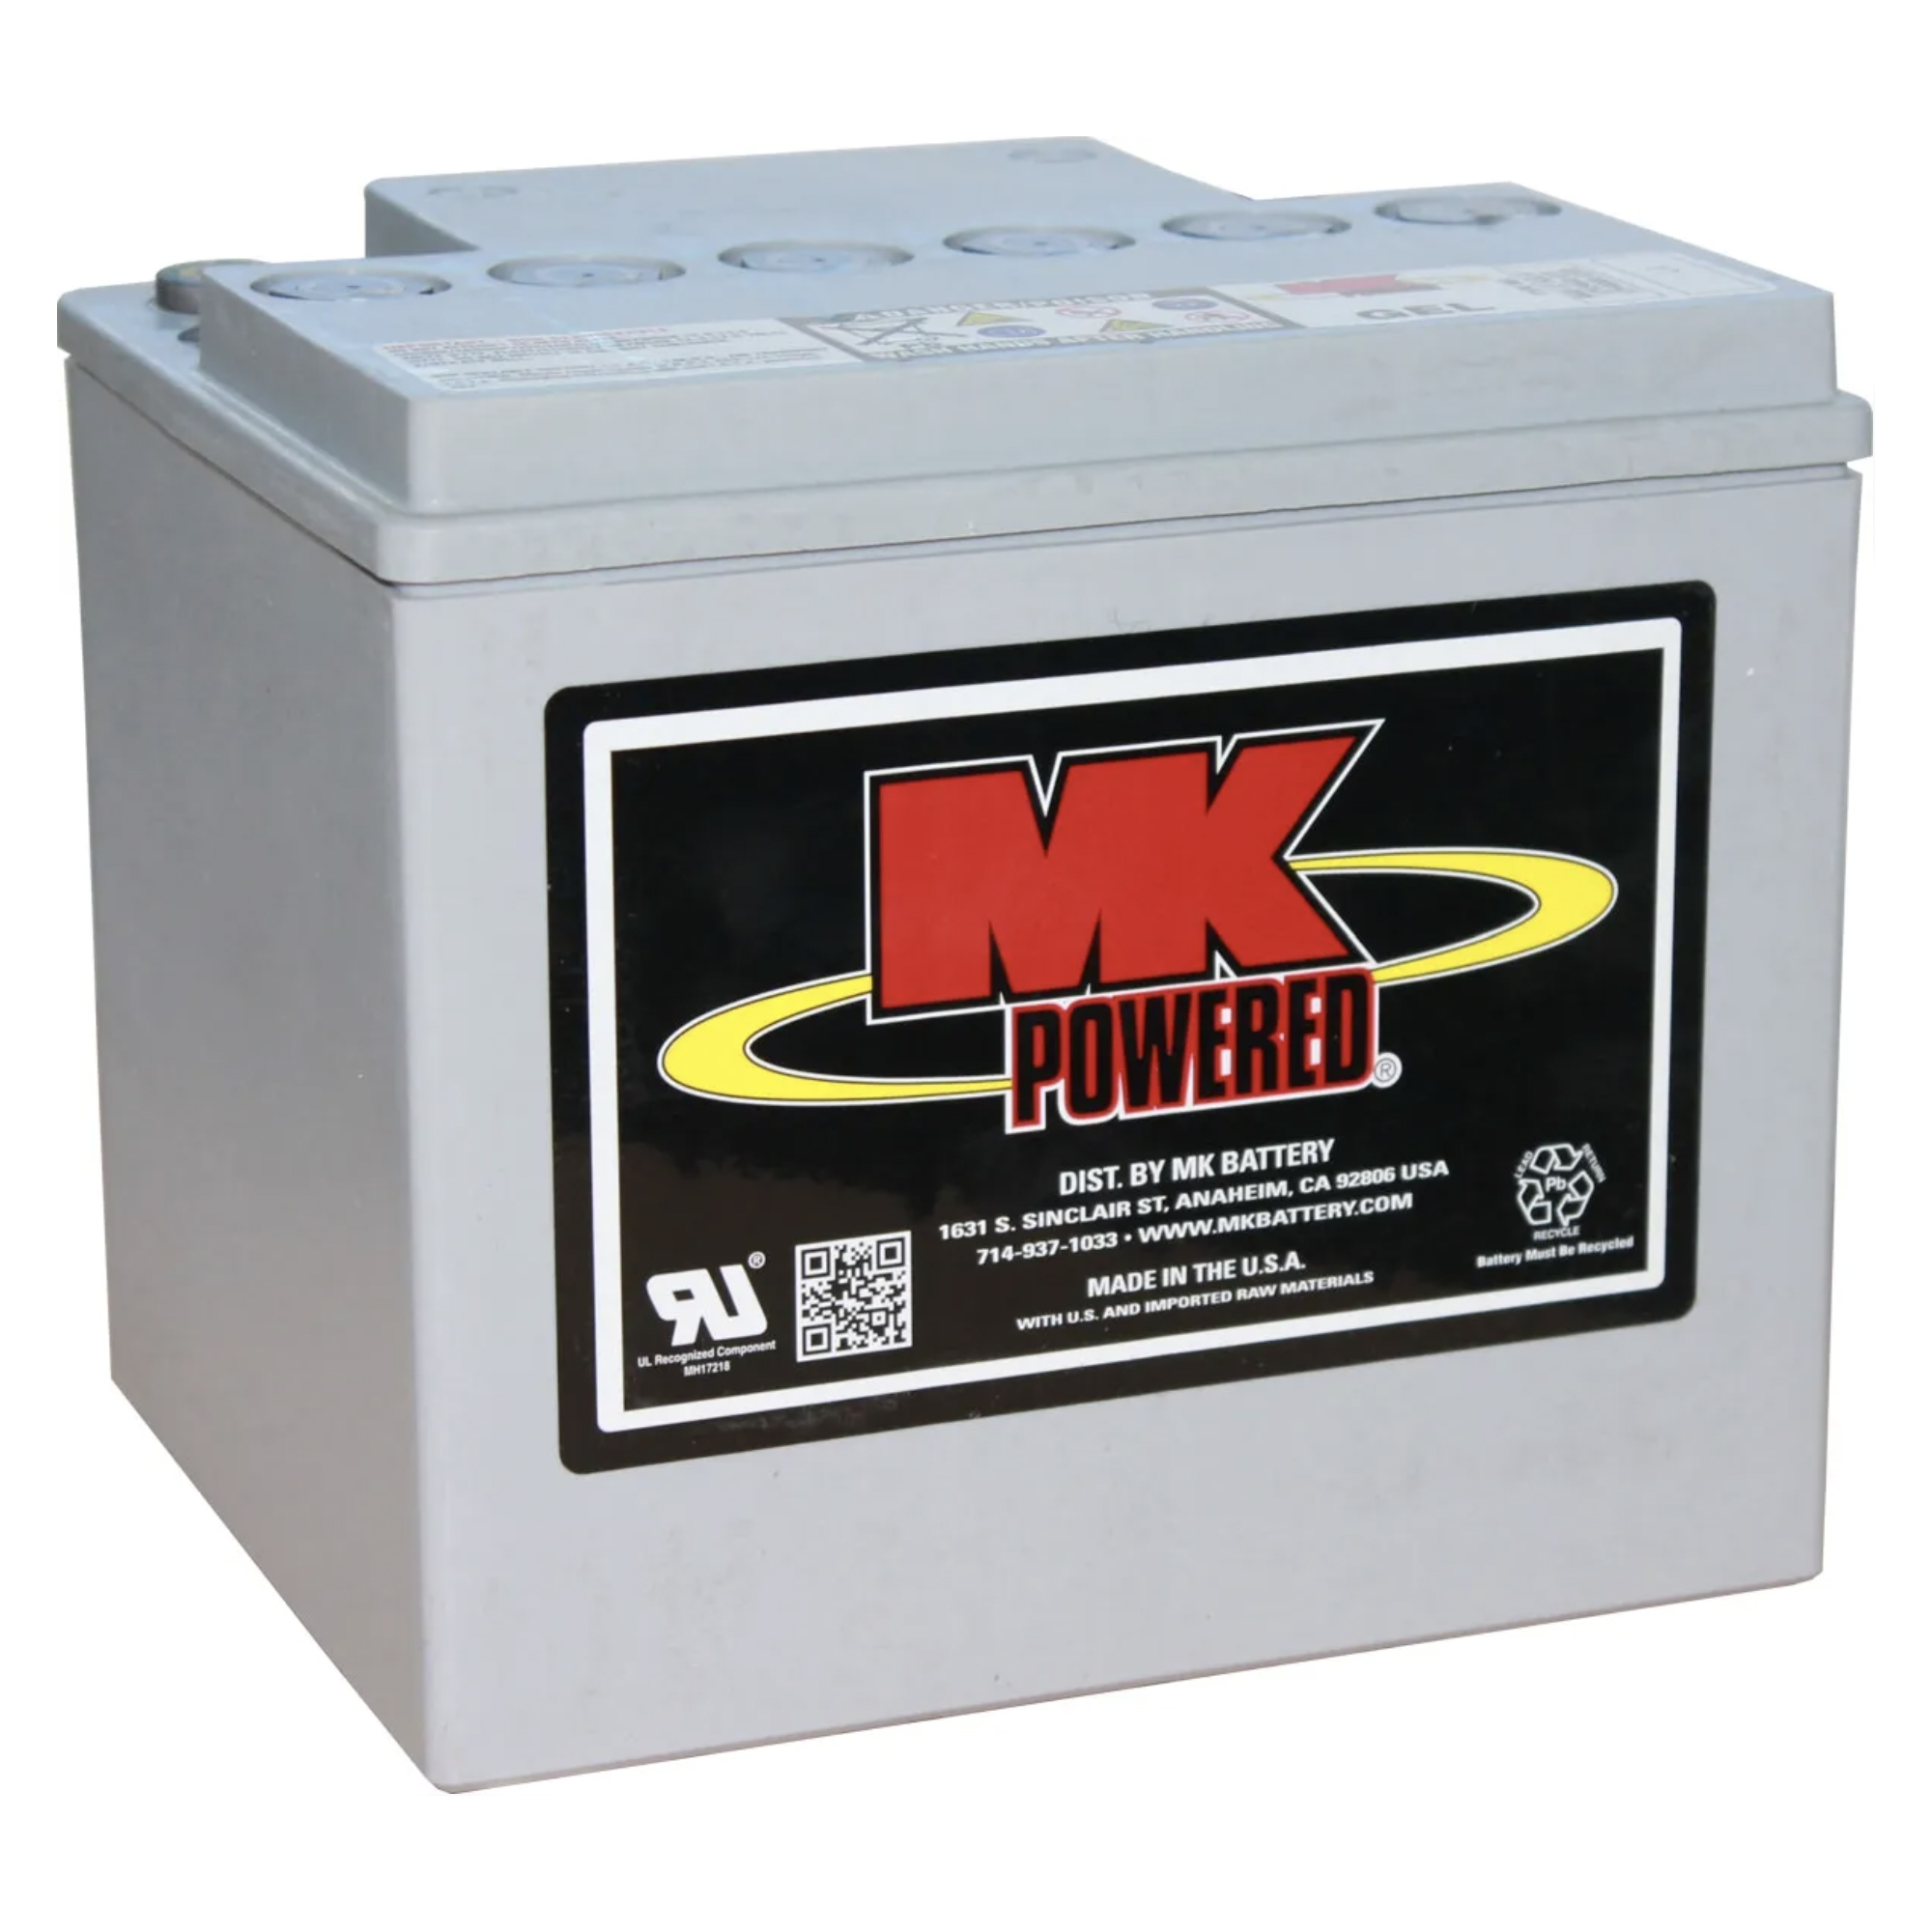 Battery m. MK es17-12 12v 18ah MK Sealed lead acid AGM Mobility Scooter Battery. Батарея m40a. Non-Spillable аккумулятор. AGM mk96.